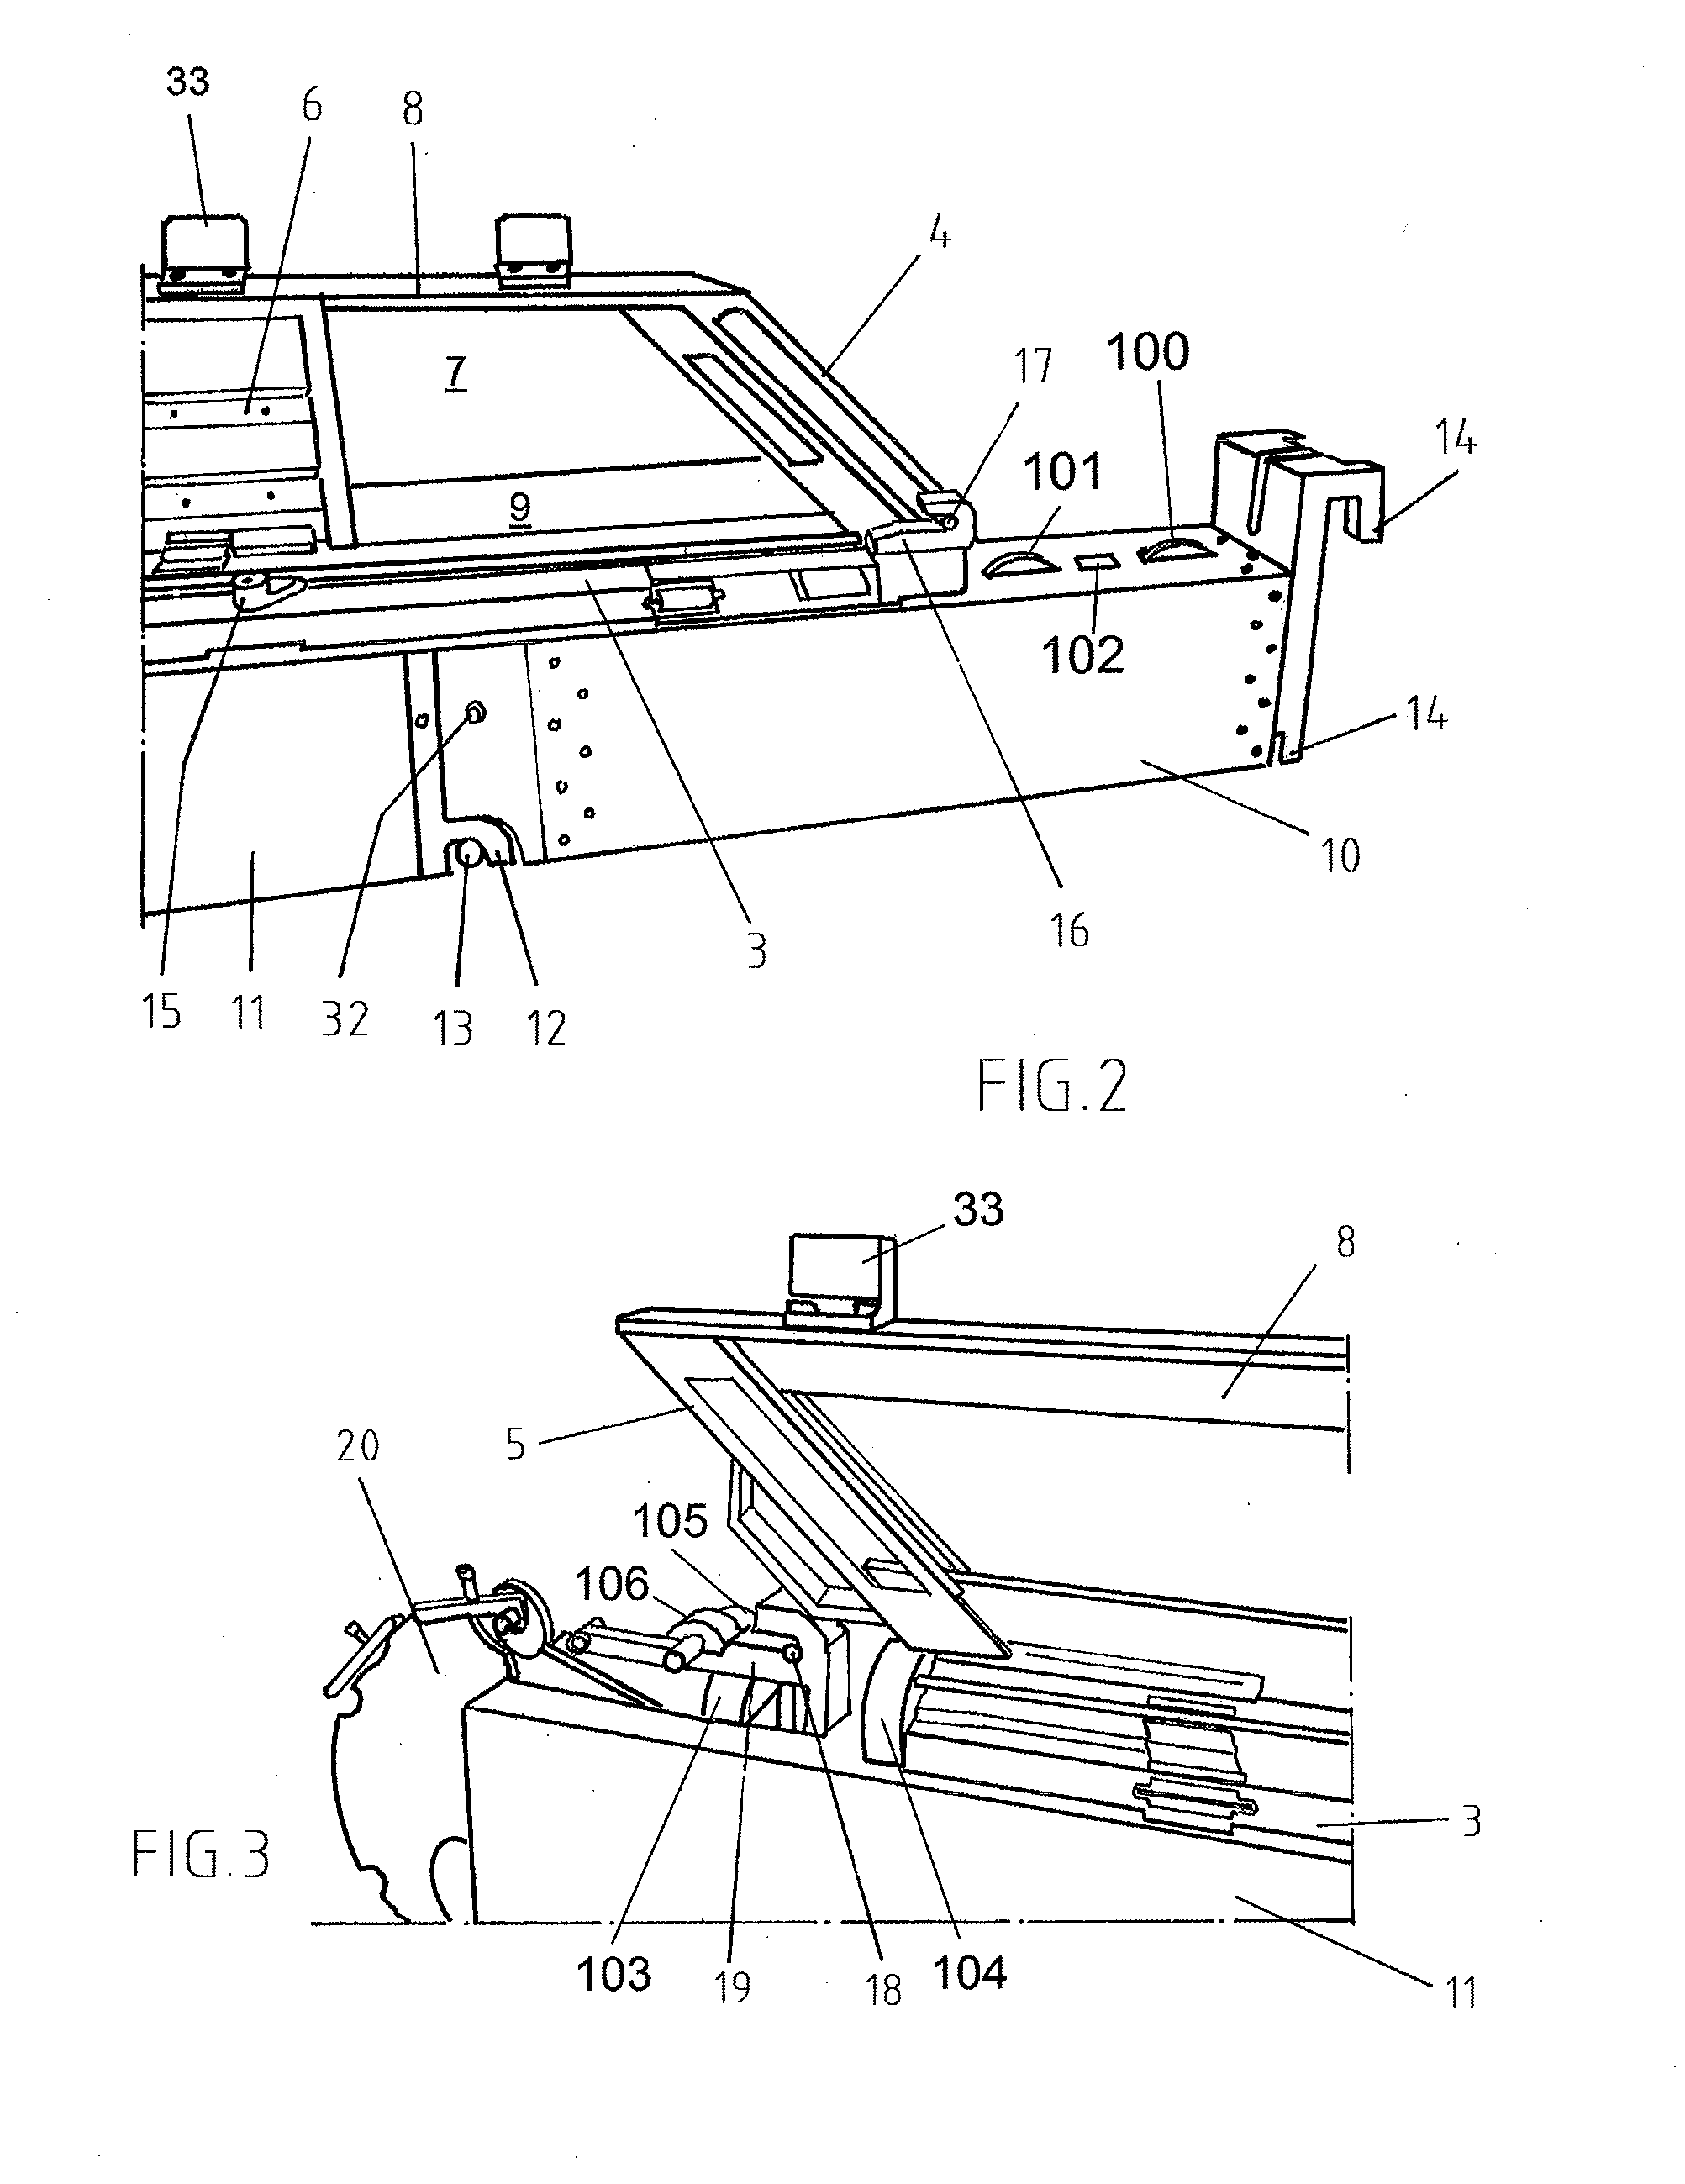 Immersion device for an optical fiber for measuring the temperature of a melt